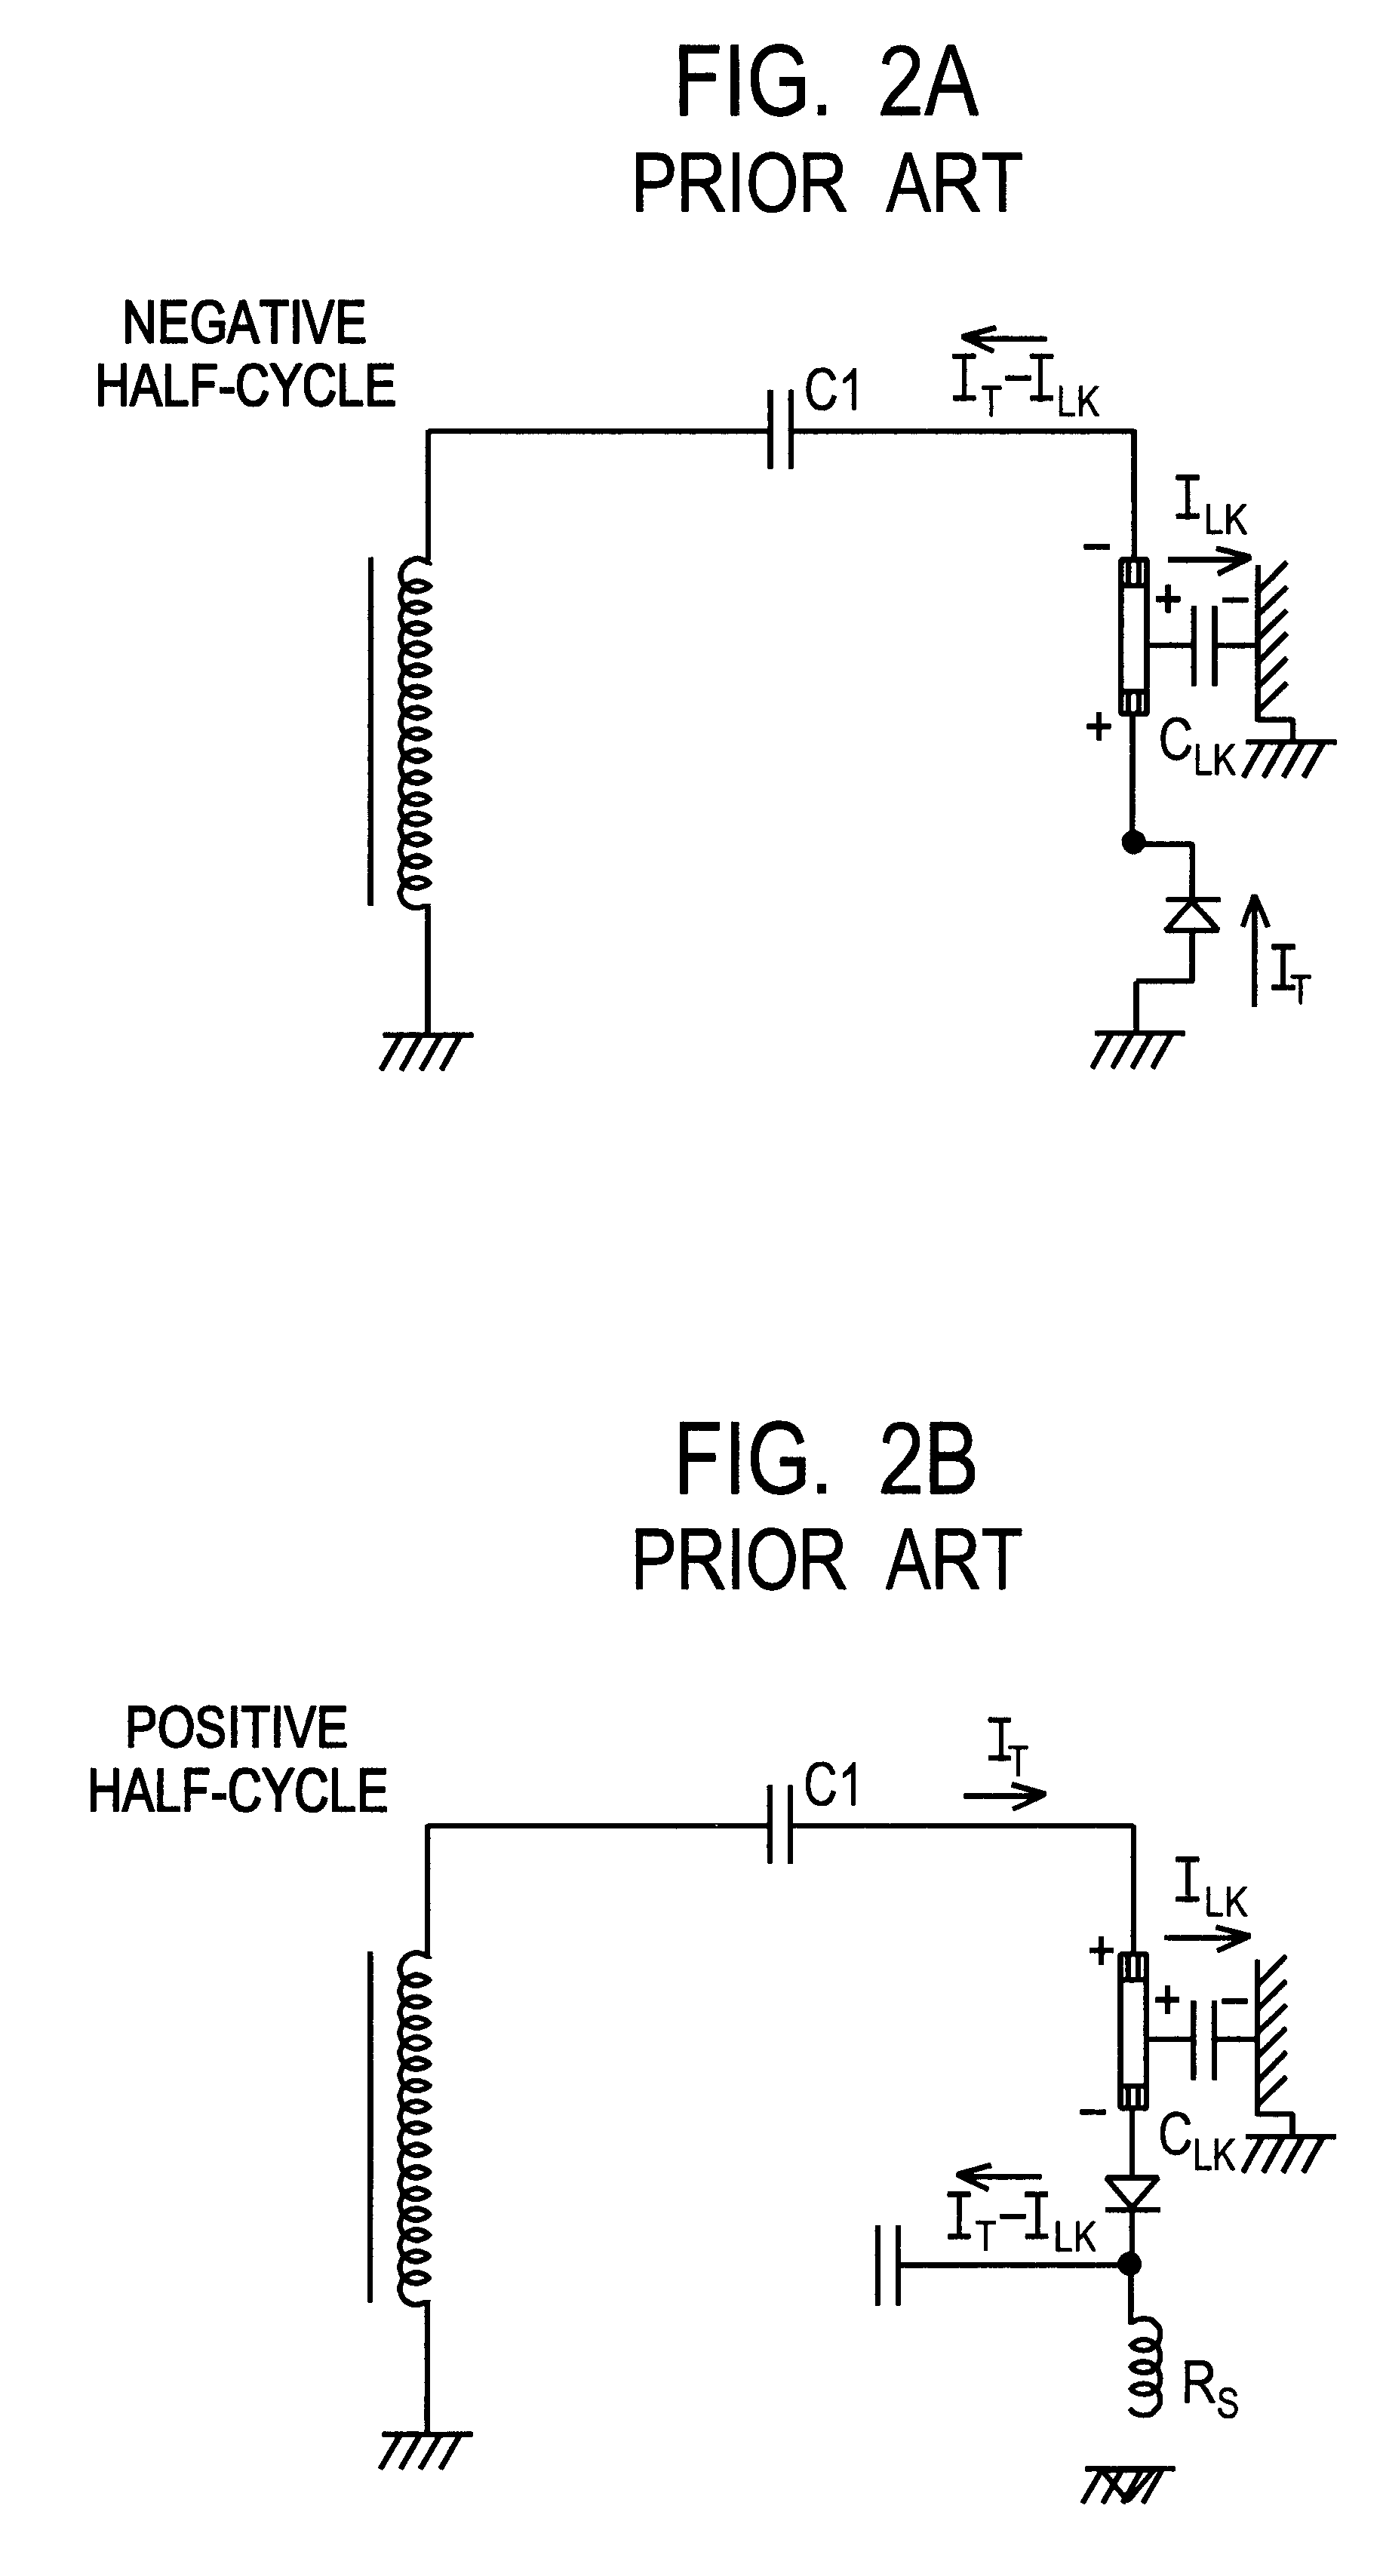 Lamp grounding and leakage current detection system